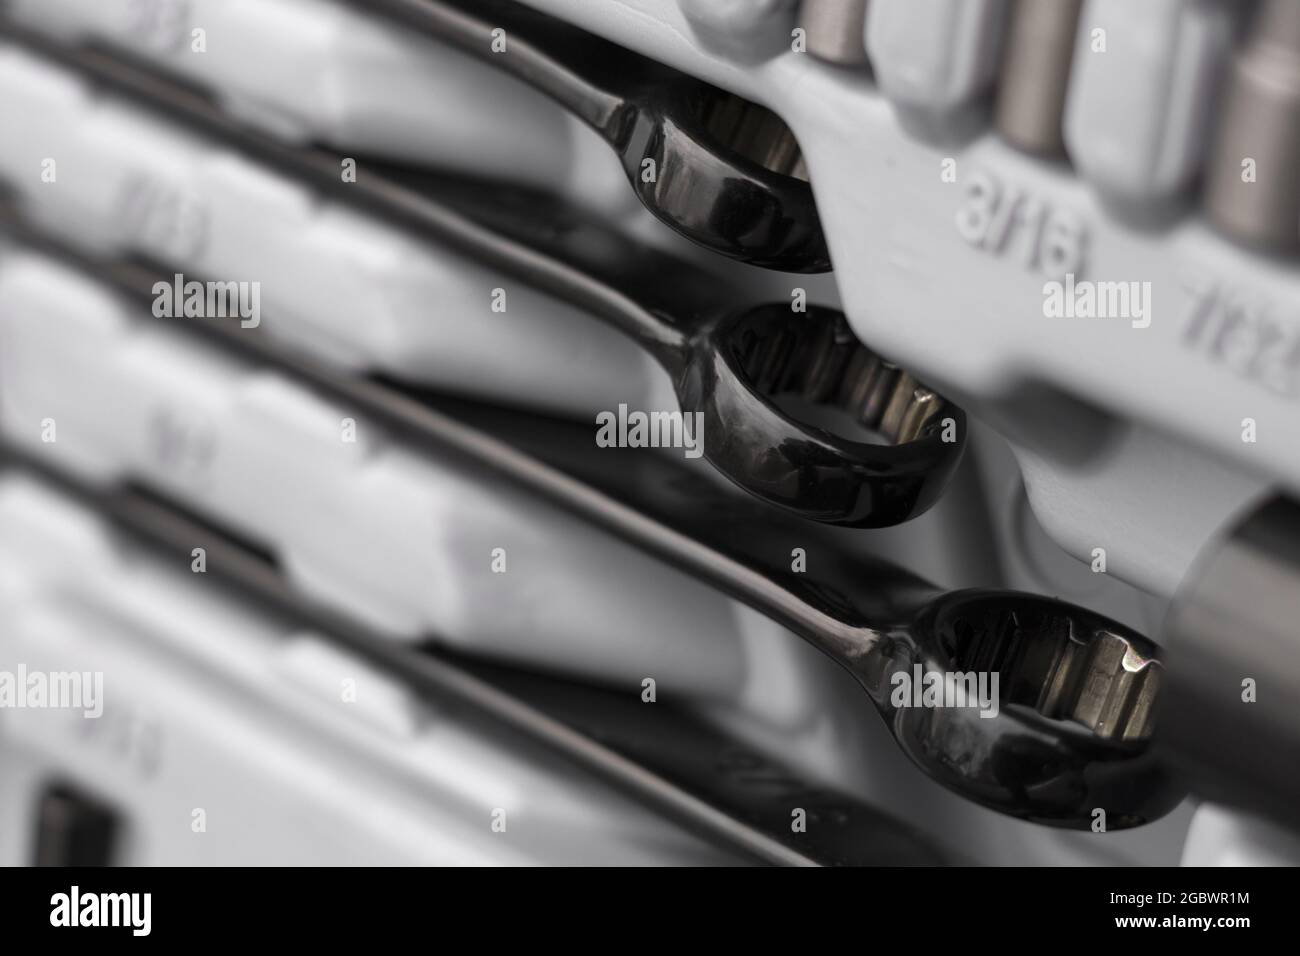 Closeup shot of wrenches in a tool set Stock Photo